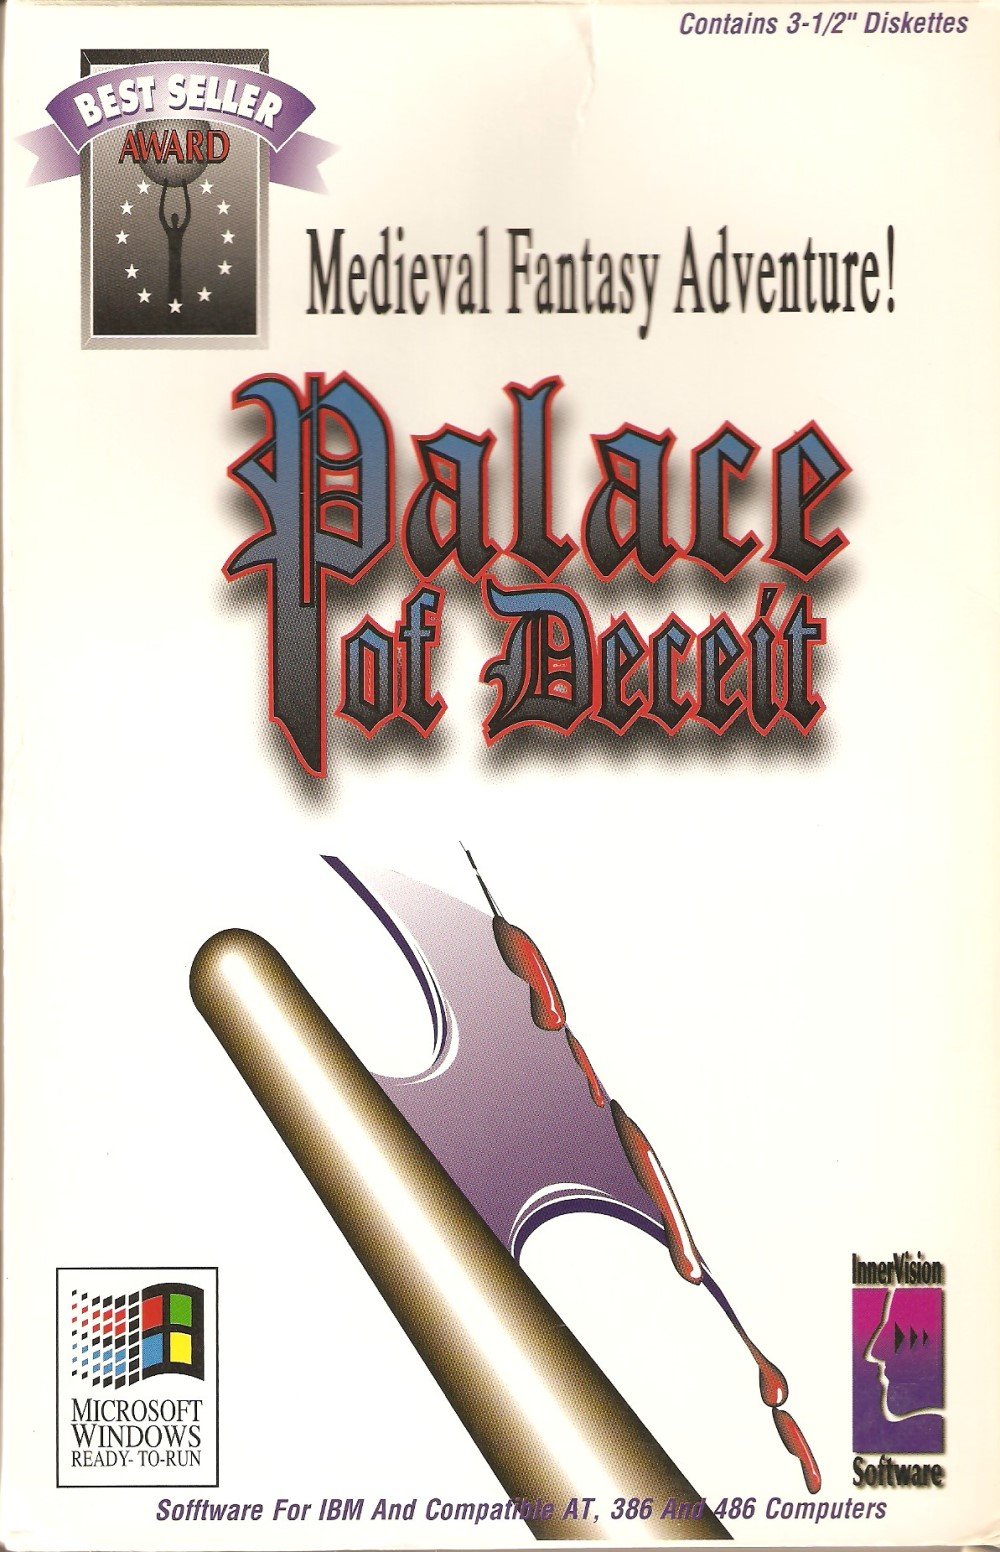 The Palace of Deceit : The Dragon's Plight